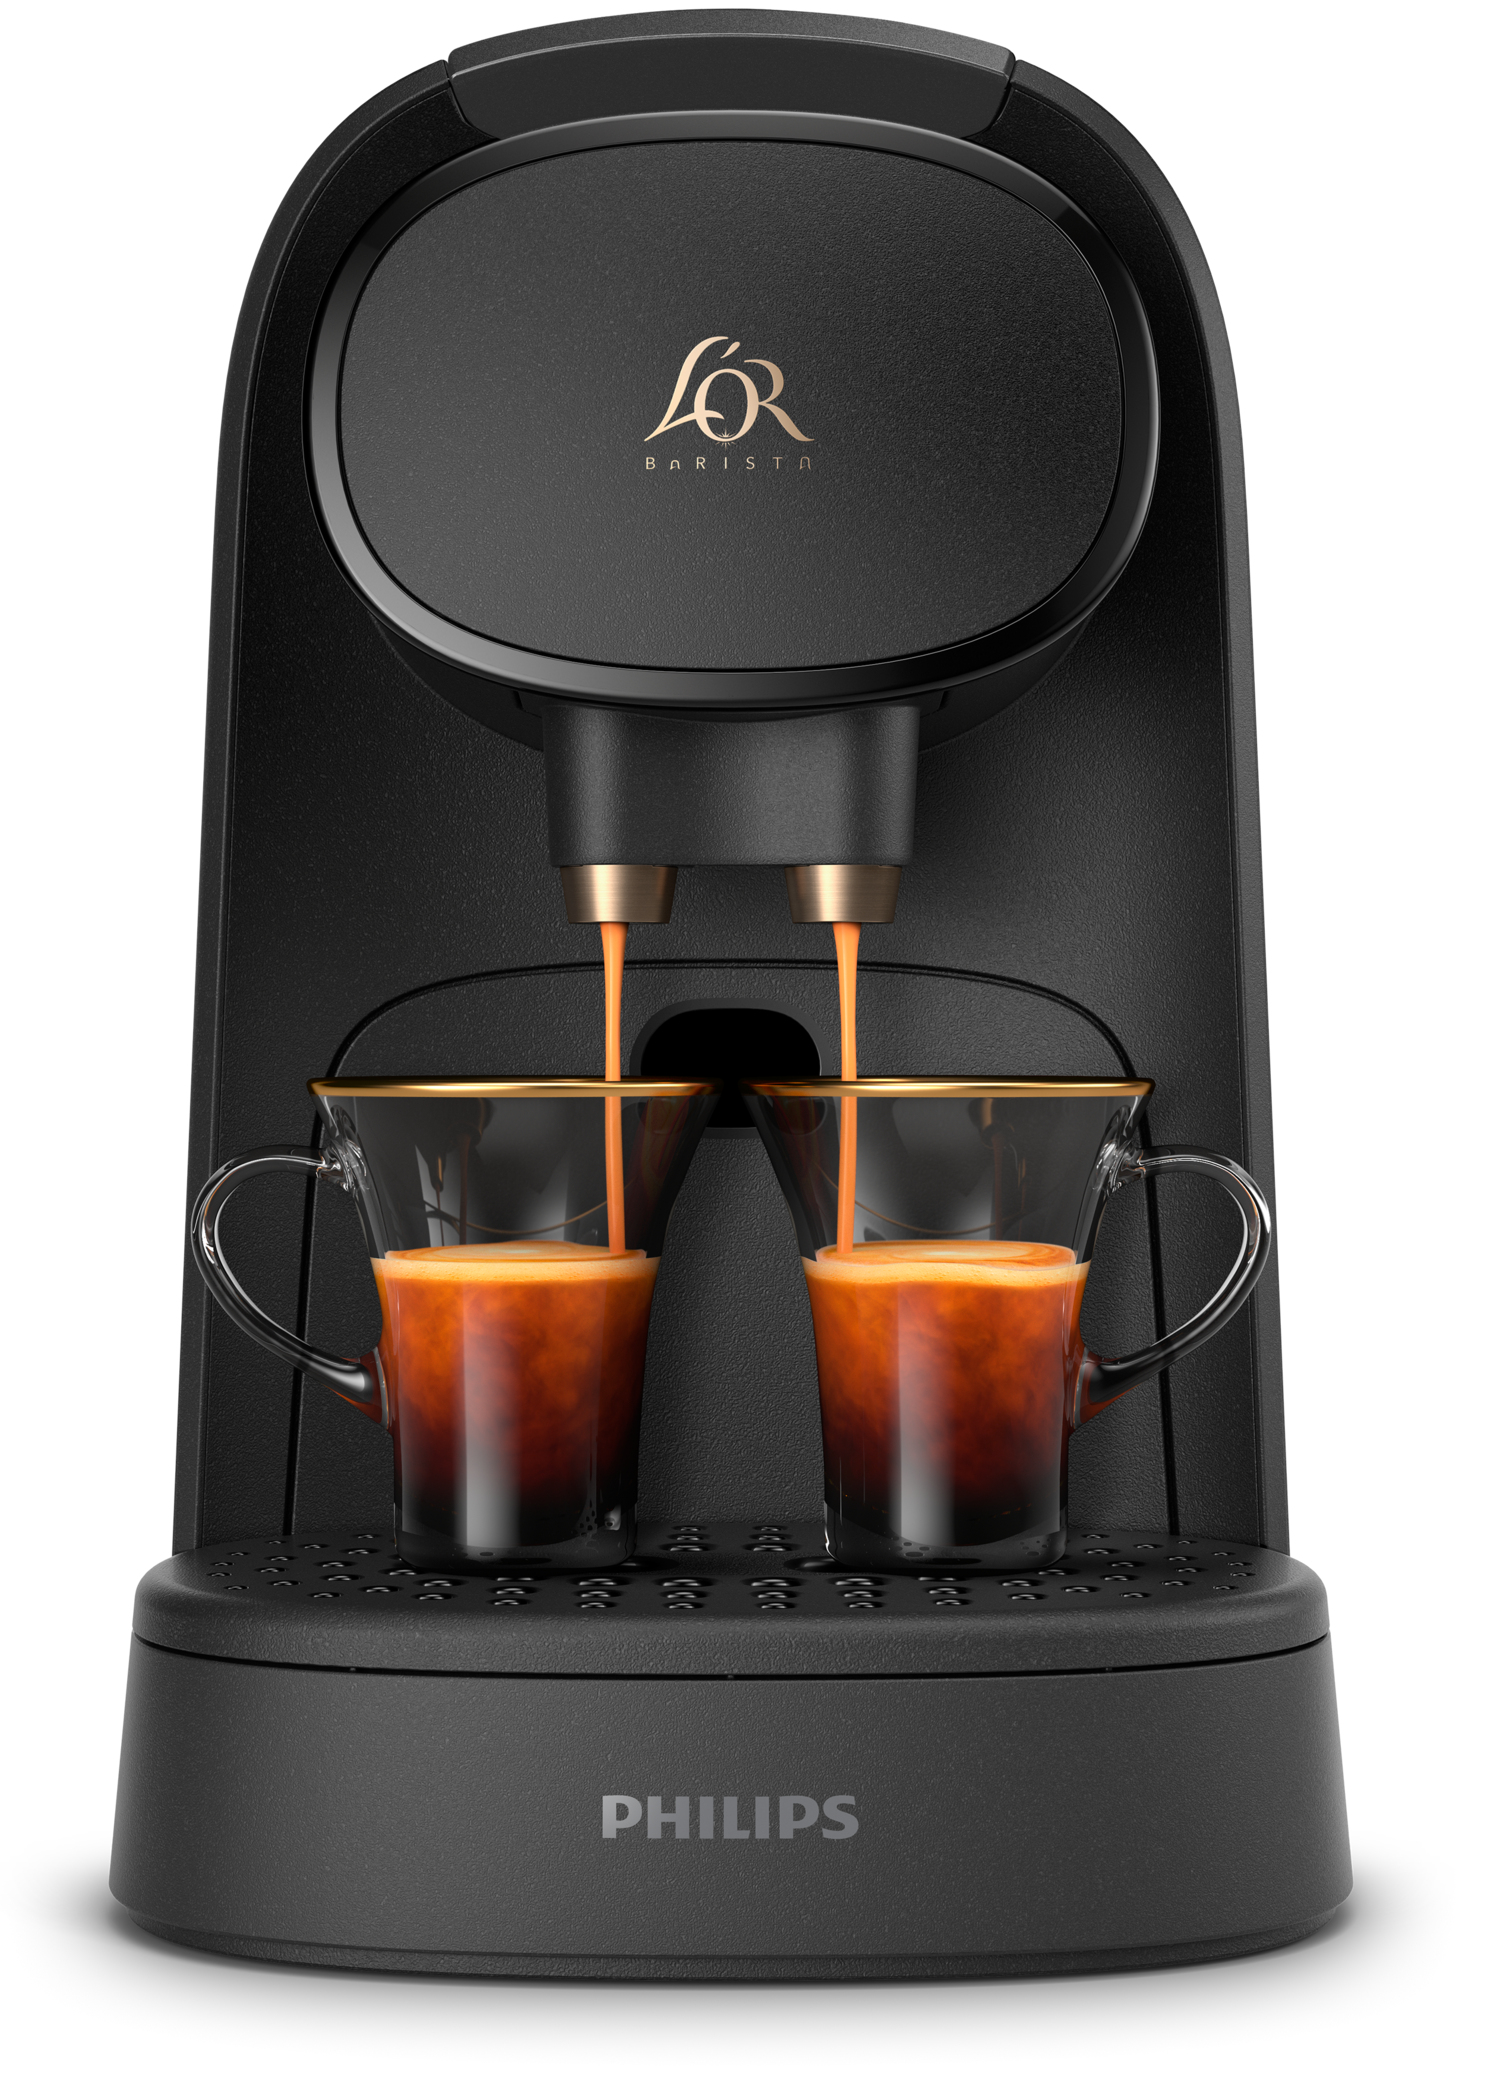 L’OR LM8012/63 coffee maker